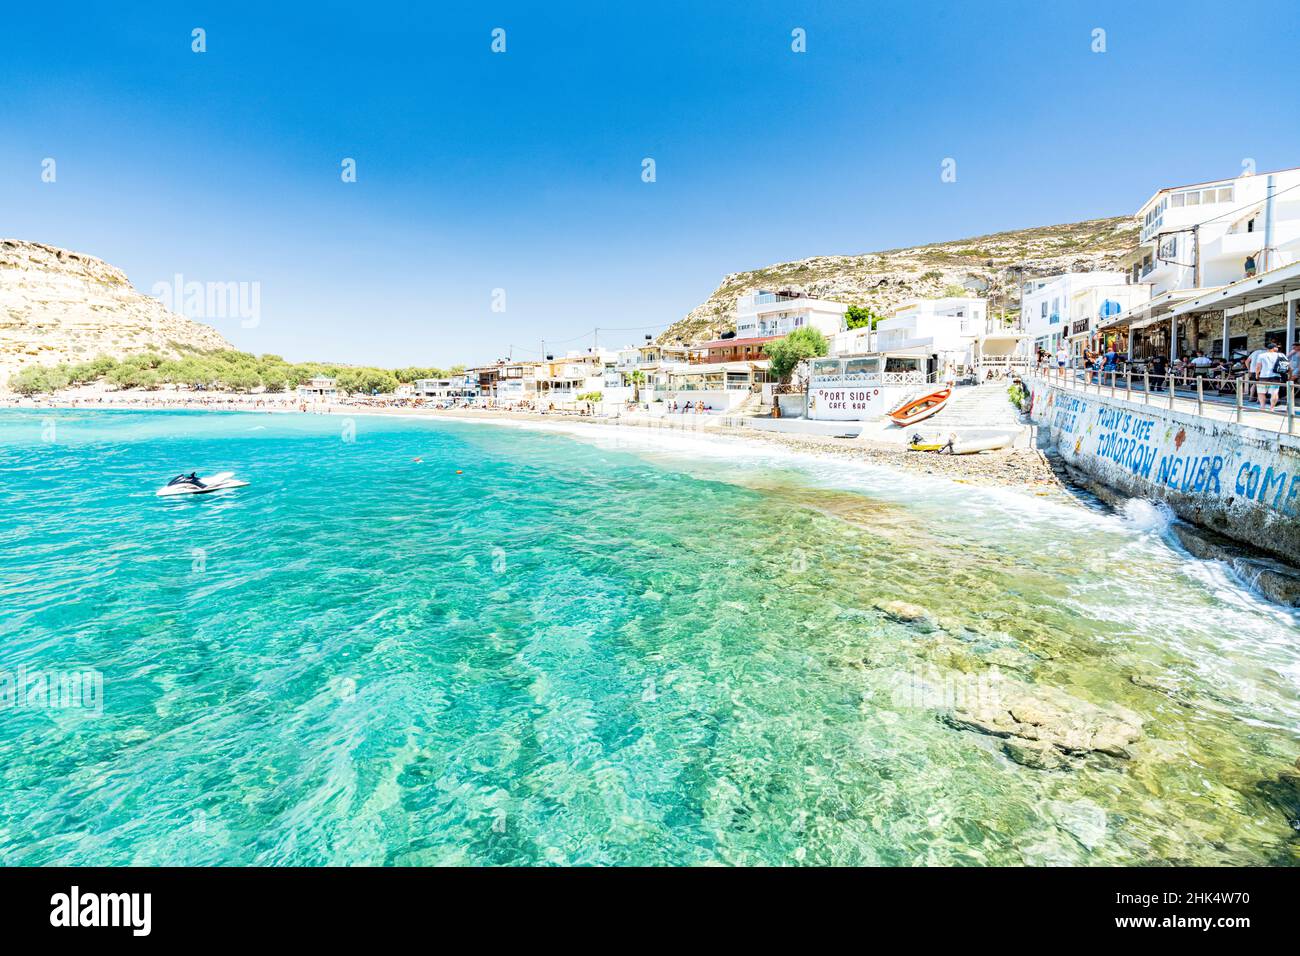 Beach of the seaside town resort of Matala washed by turquoise sea, Crete, Greek Islands, Greece, Europe Stock Photo